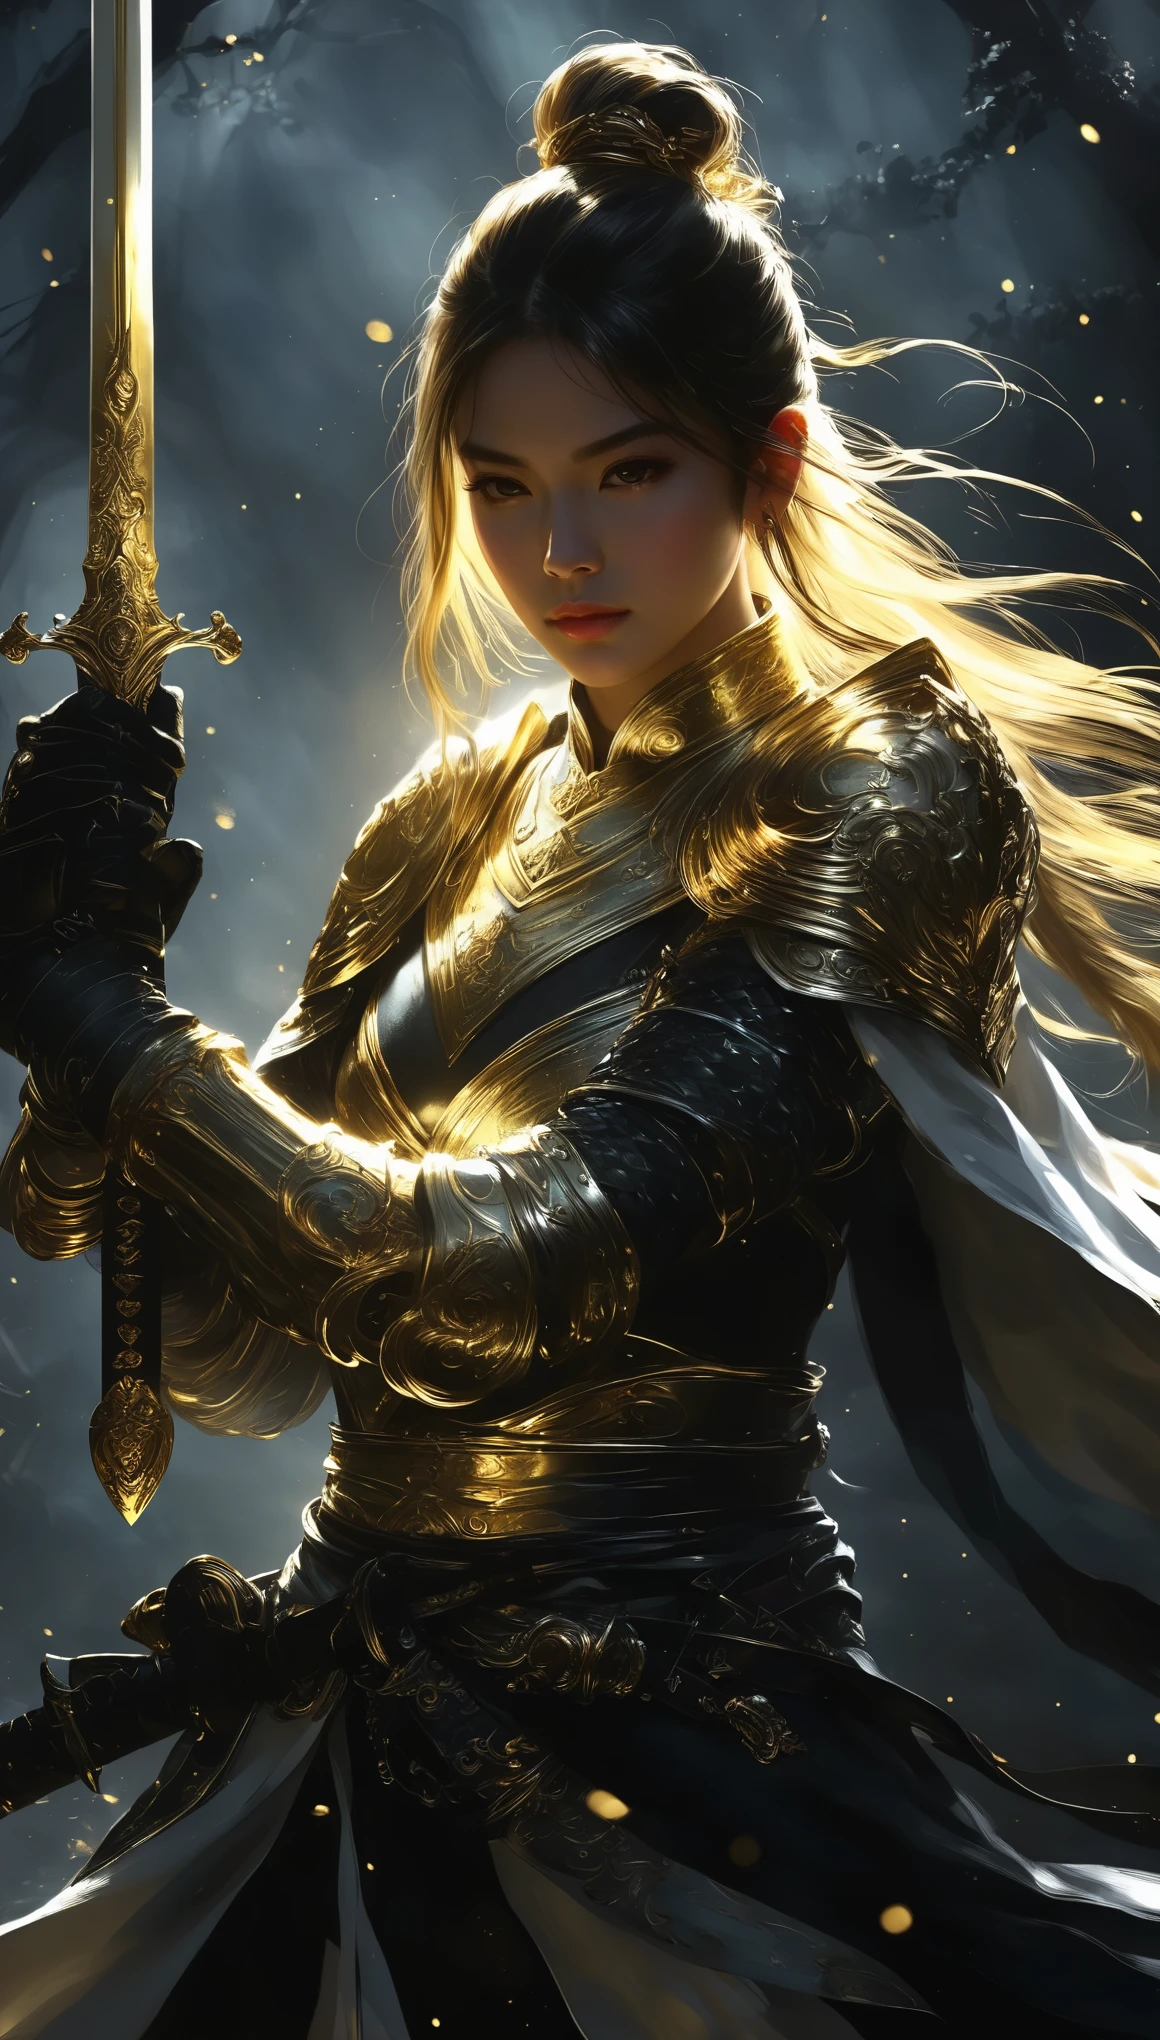 Gold Wire Wrapping Crafts， 1 girl,  whole body, Start-up.Female swordsman， Hold the hilt of the sword，Under the spotlight of the dark secret realm，Black fog all around